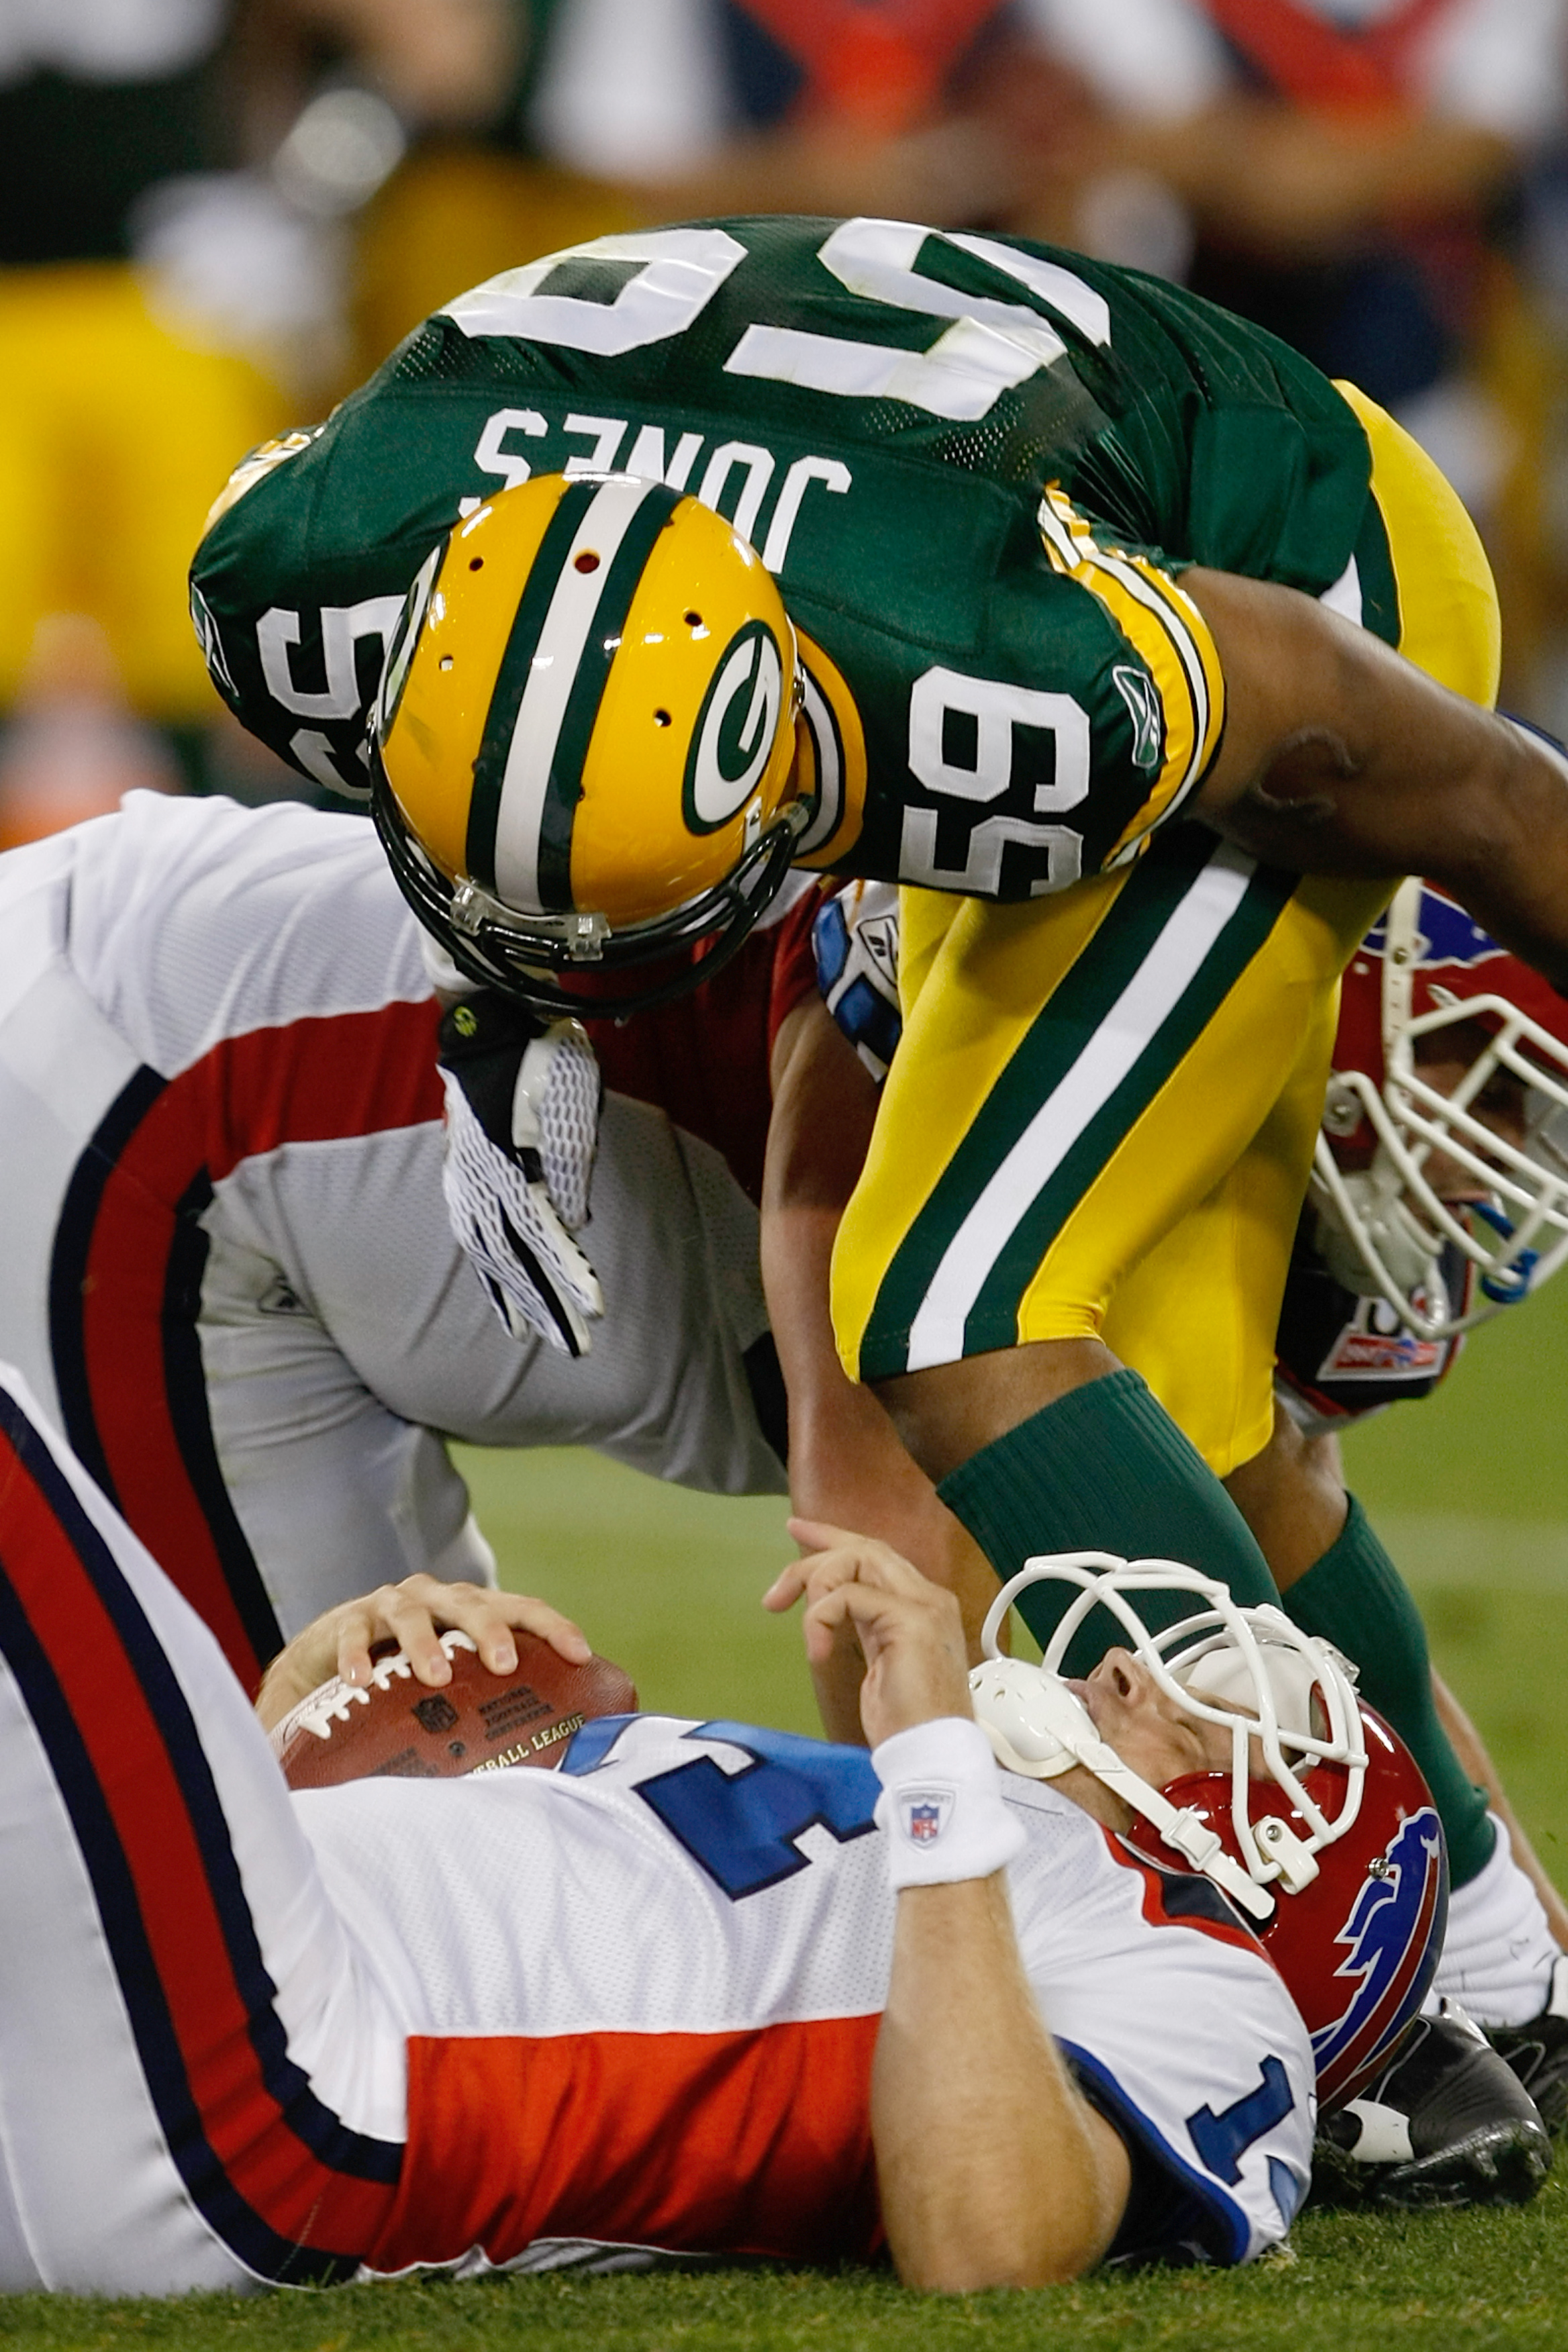 Buffalo Bills Vs. Green Bay Packers: Week Two Preview and Keys To